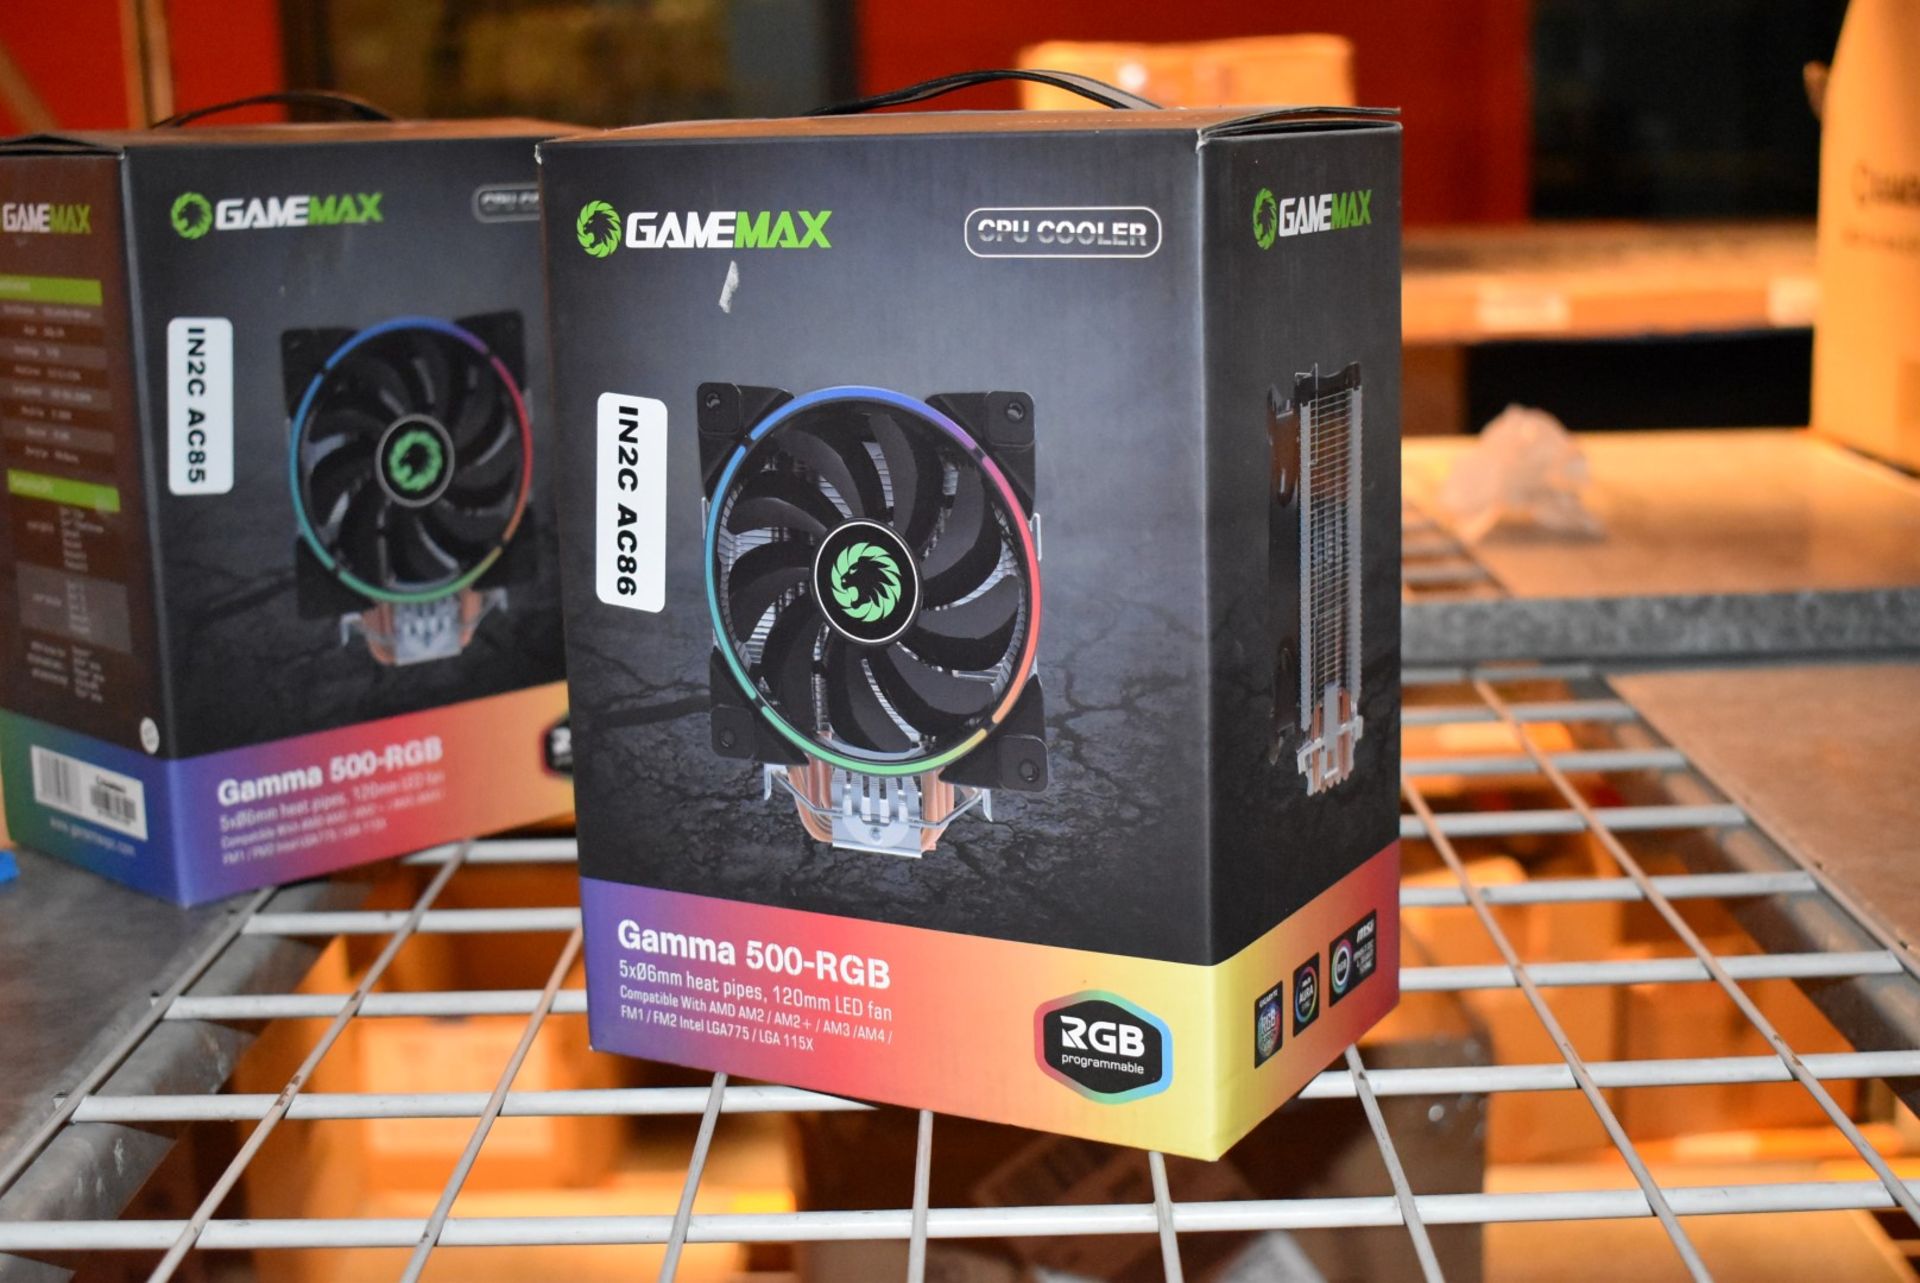 1 x GameMax Gamma 500-RGB CPU Cooler Tower With 120mm LED Fan - Suitable For AMD AM4 and Intel LGA - Image 4 of 4